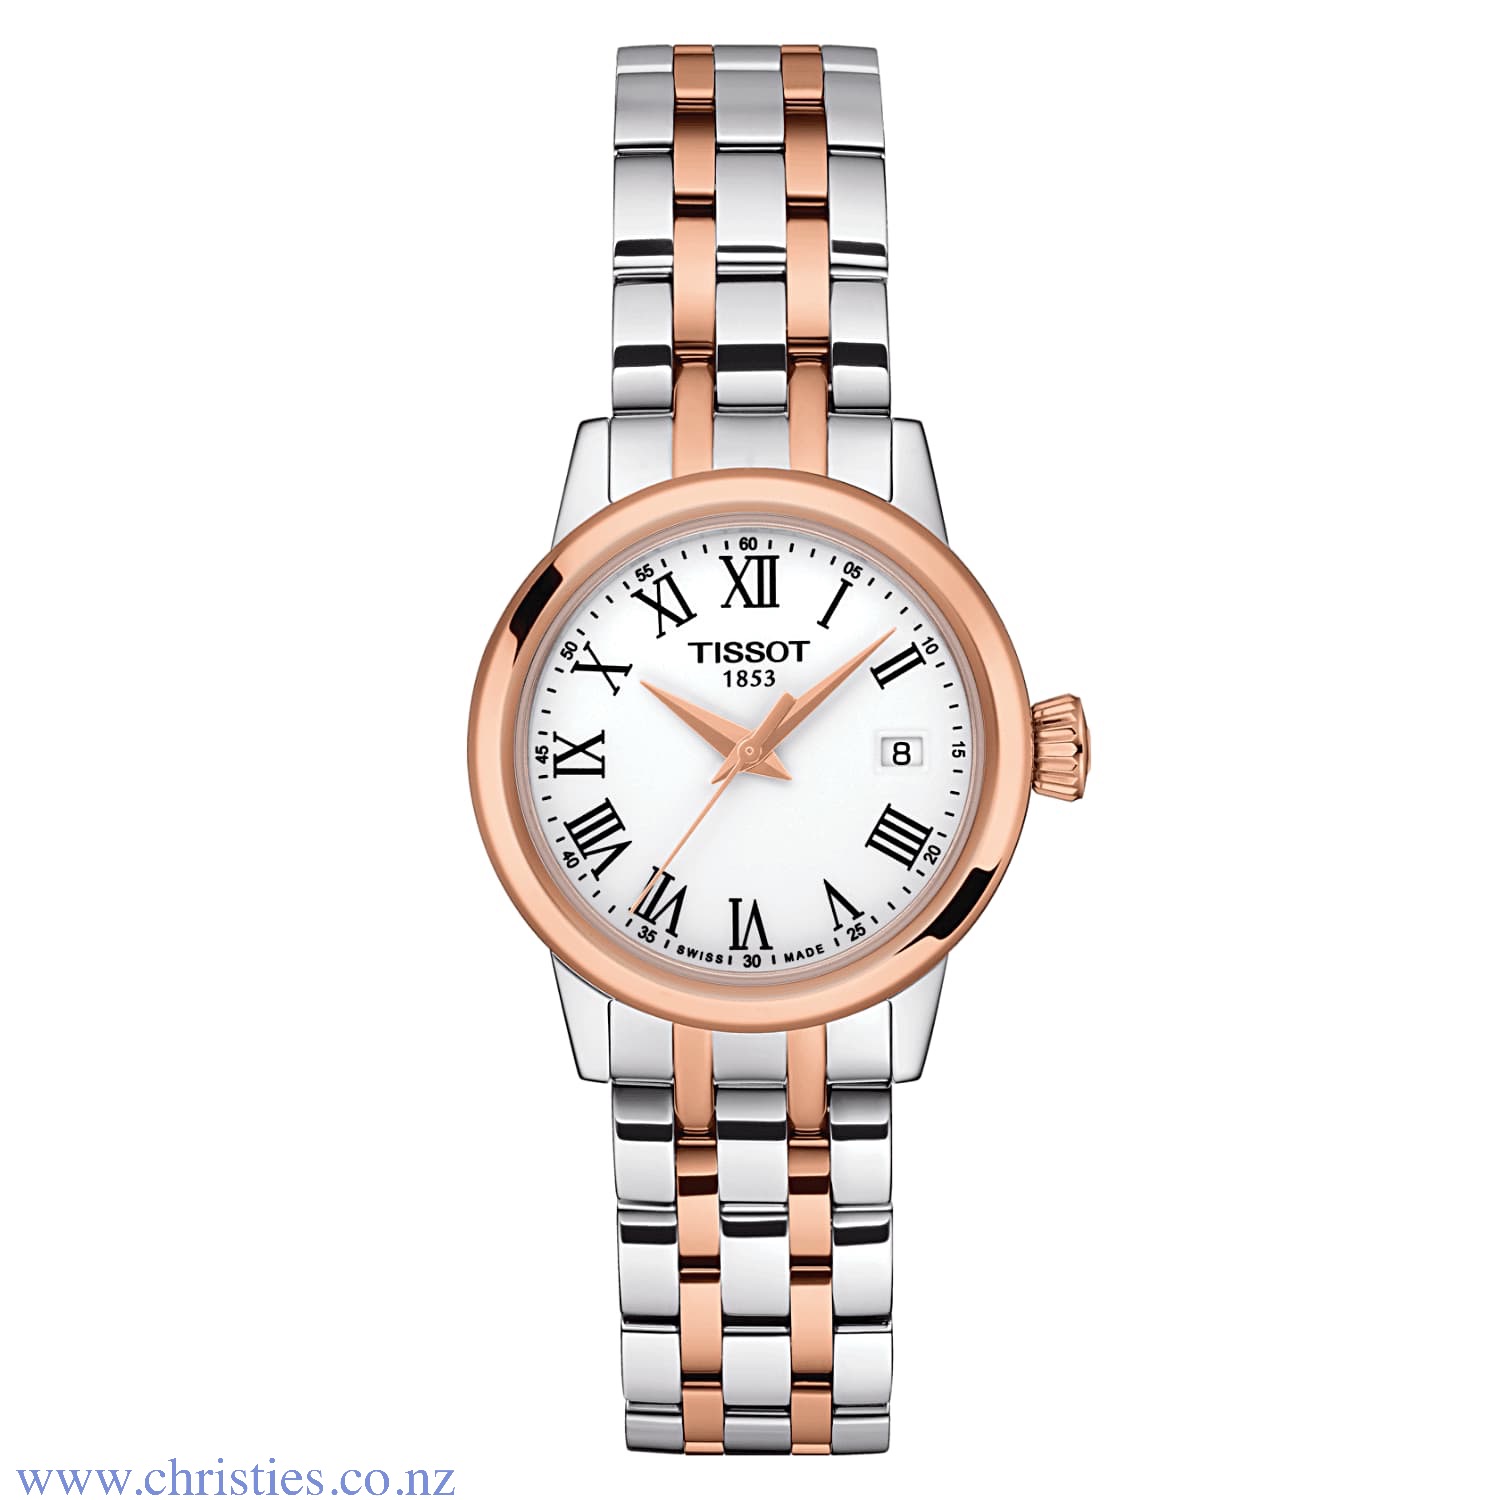 TISSOT T-Classic Classic Dream Lady T129.210.22.013.00. These modern yet classic timepieces provide sophistication and a timeless design suitable both formally or casually as an everyday wear. With an array of options, there is a model to suit everyone Hu